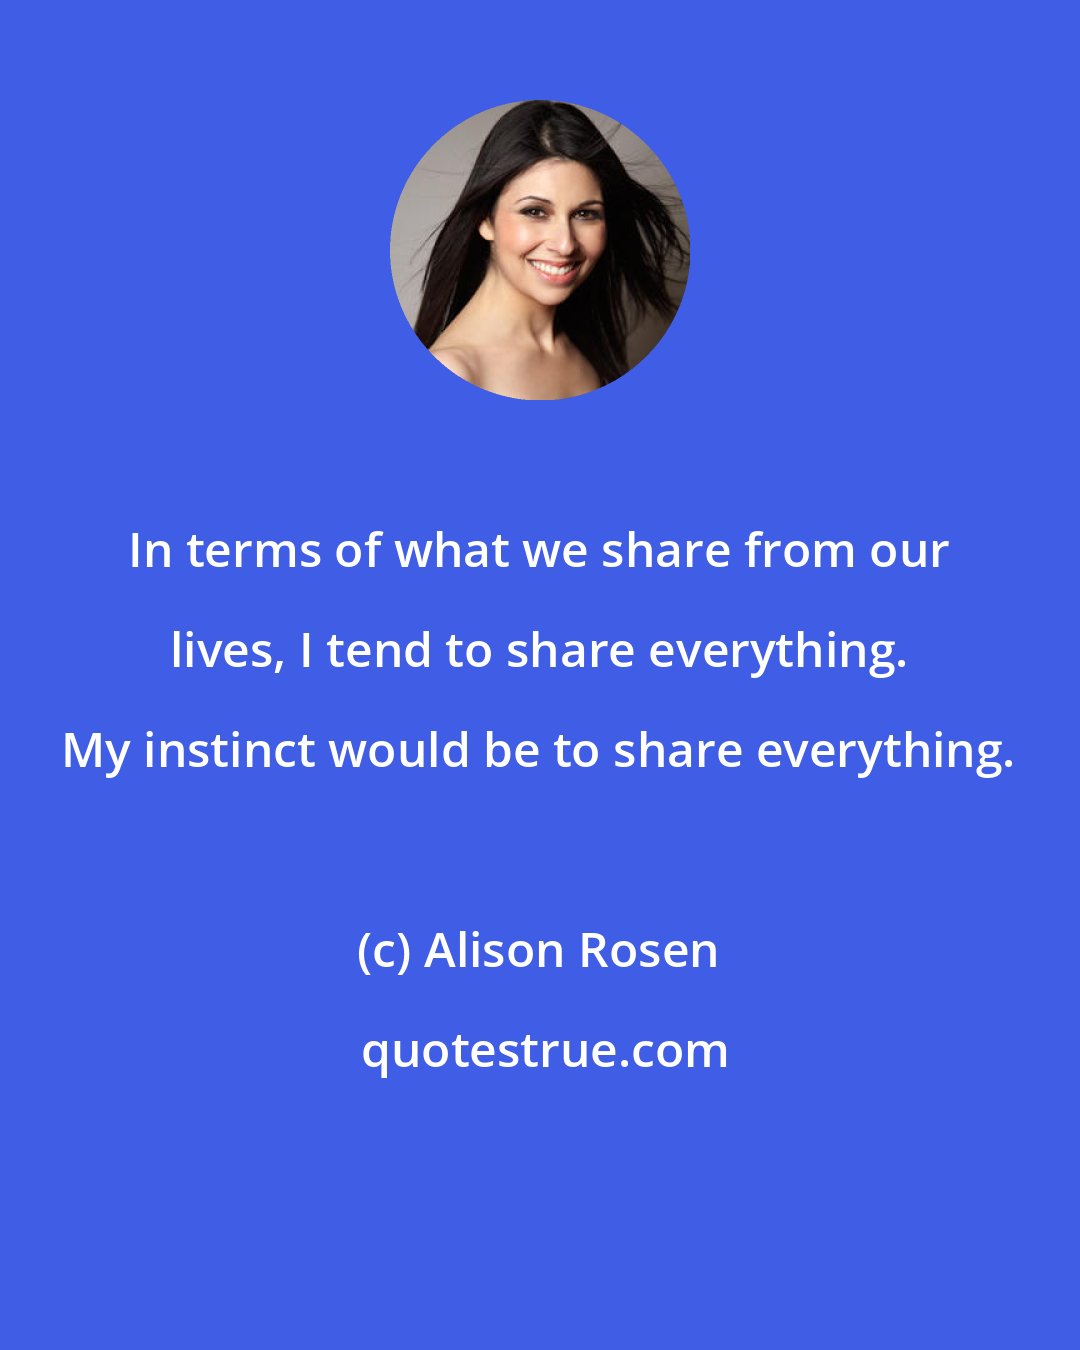 Alison Rosen: In terms of what we share from our lives, I tend to share everything. My instinct would be to share everything.